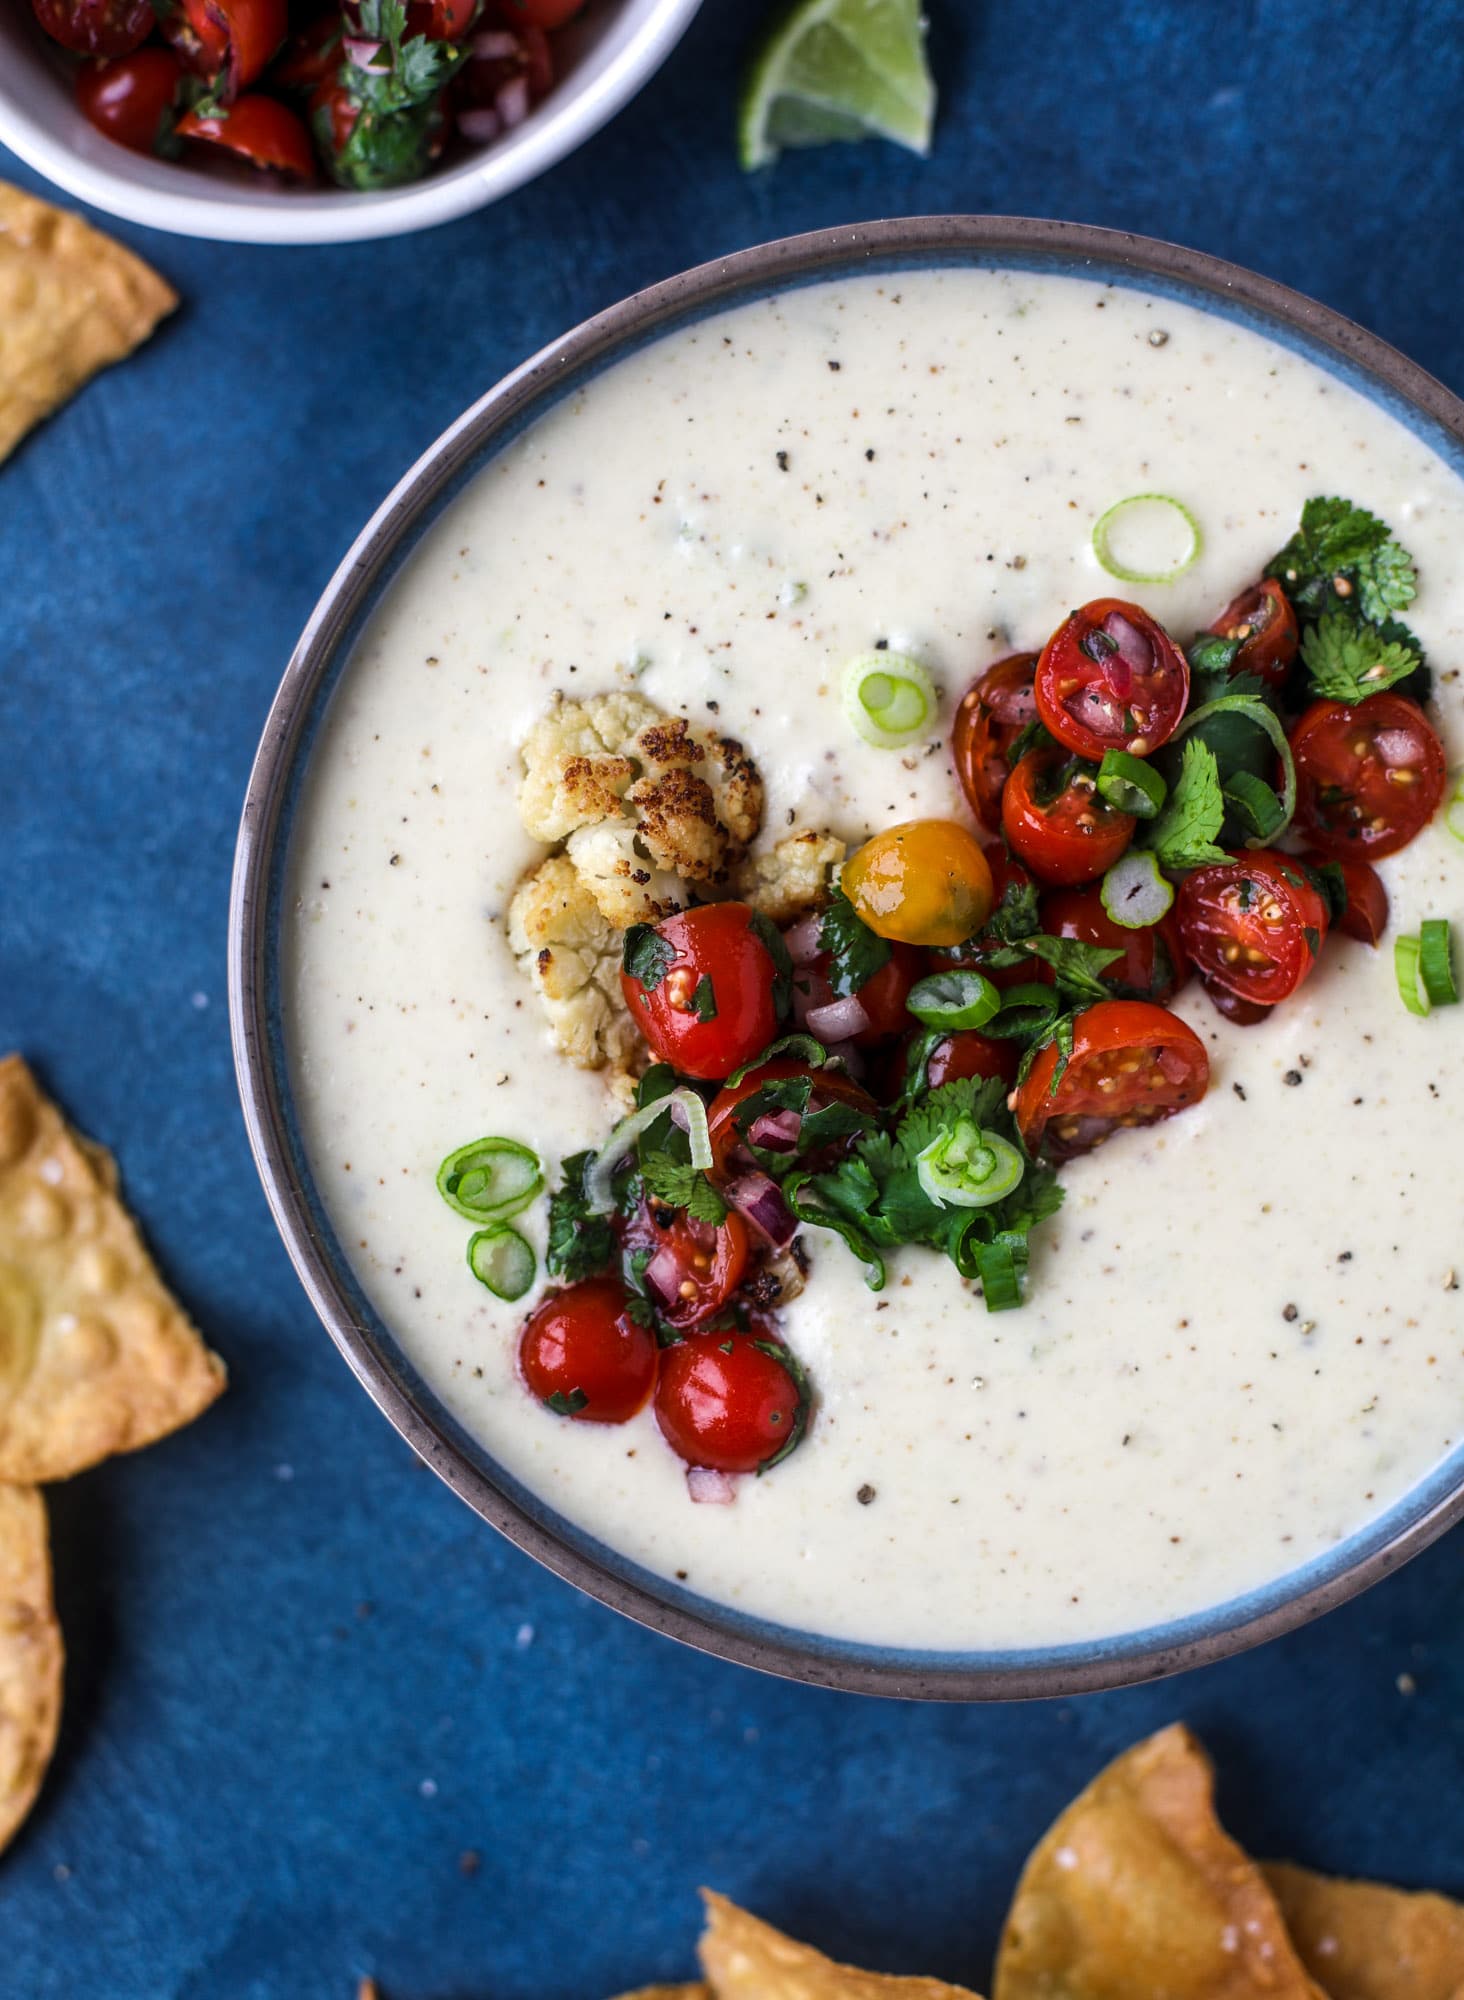 This roasted cauliflower queso has all the deliciousness of regular queso, with roasted cauliflower added in. It's satisfying and tastes like heaven. I howsweeteats.com #cauliflower #queso